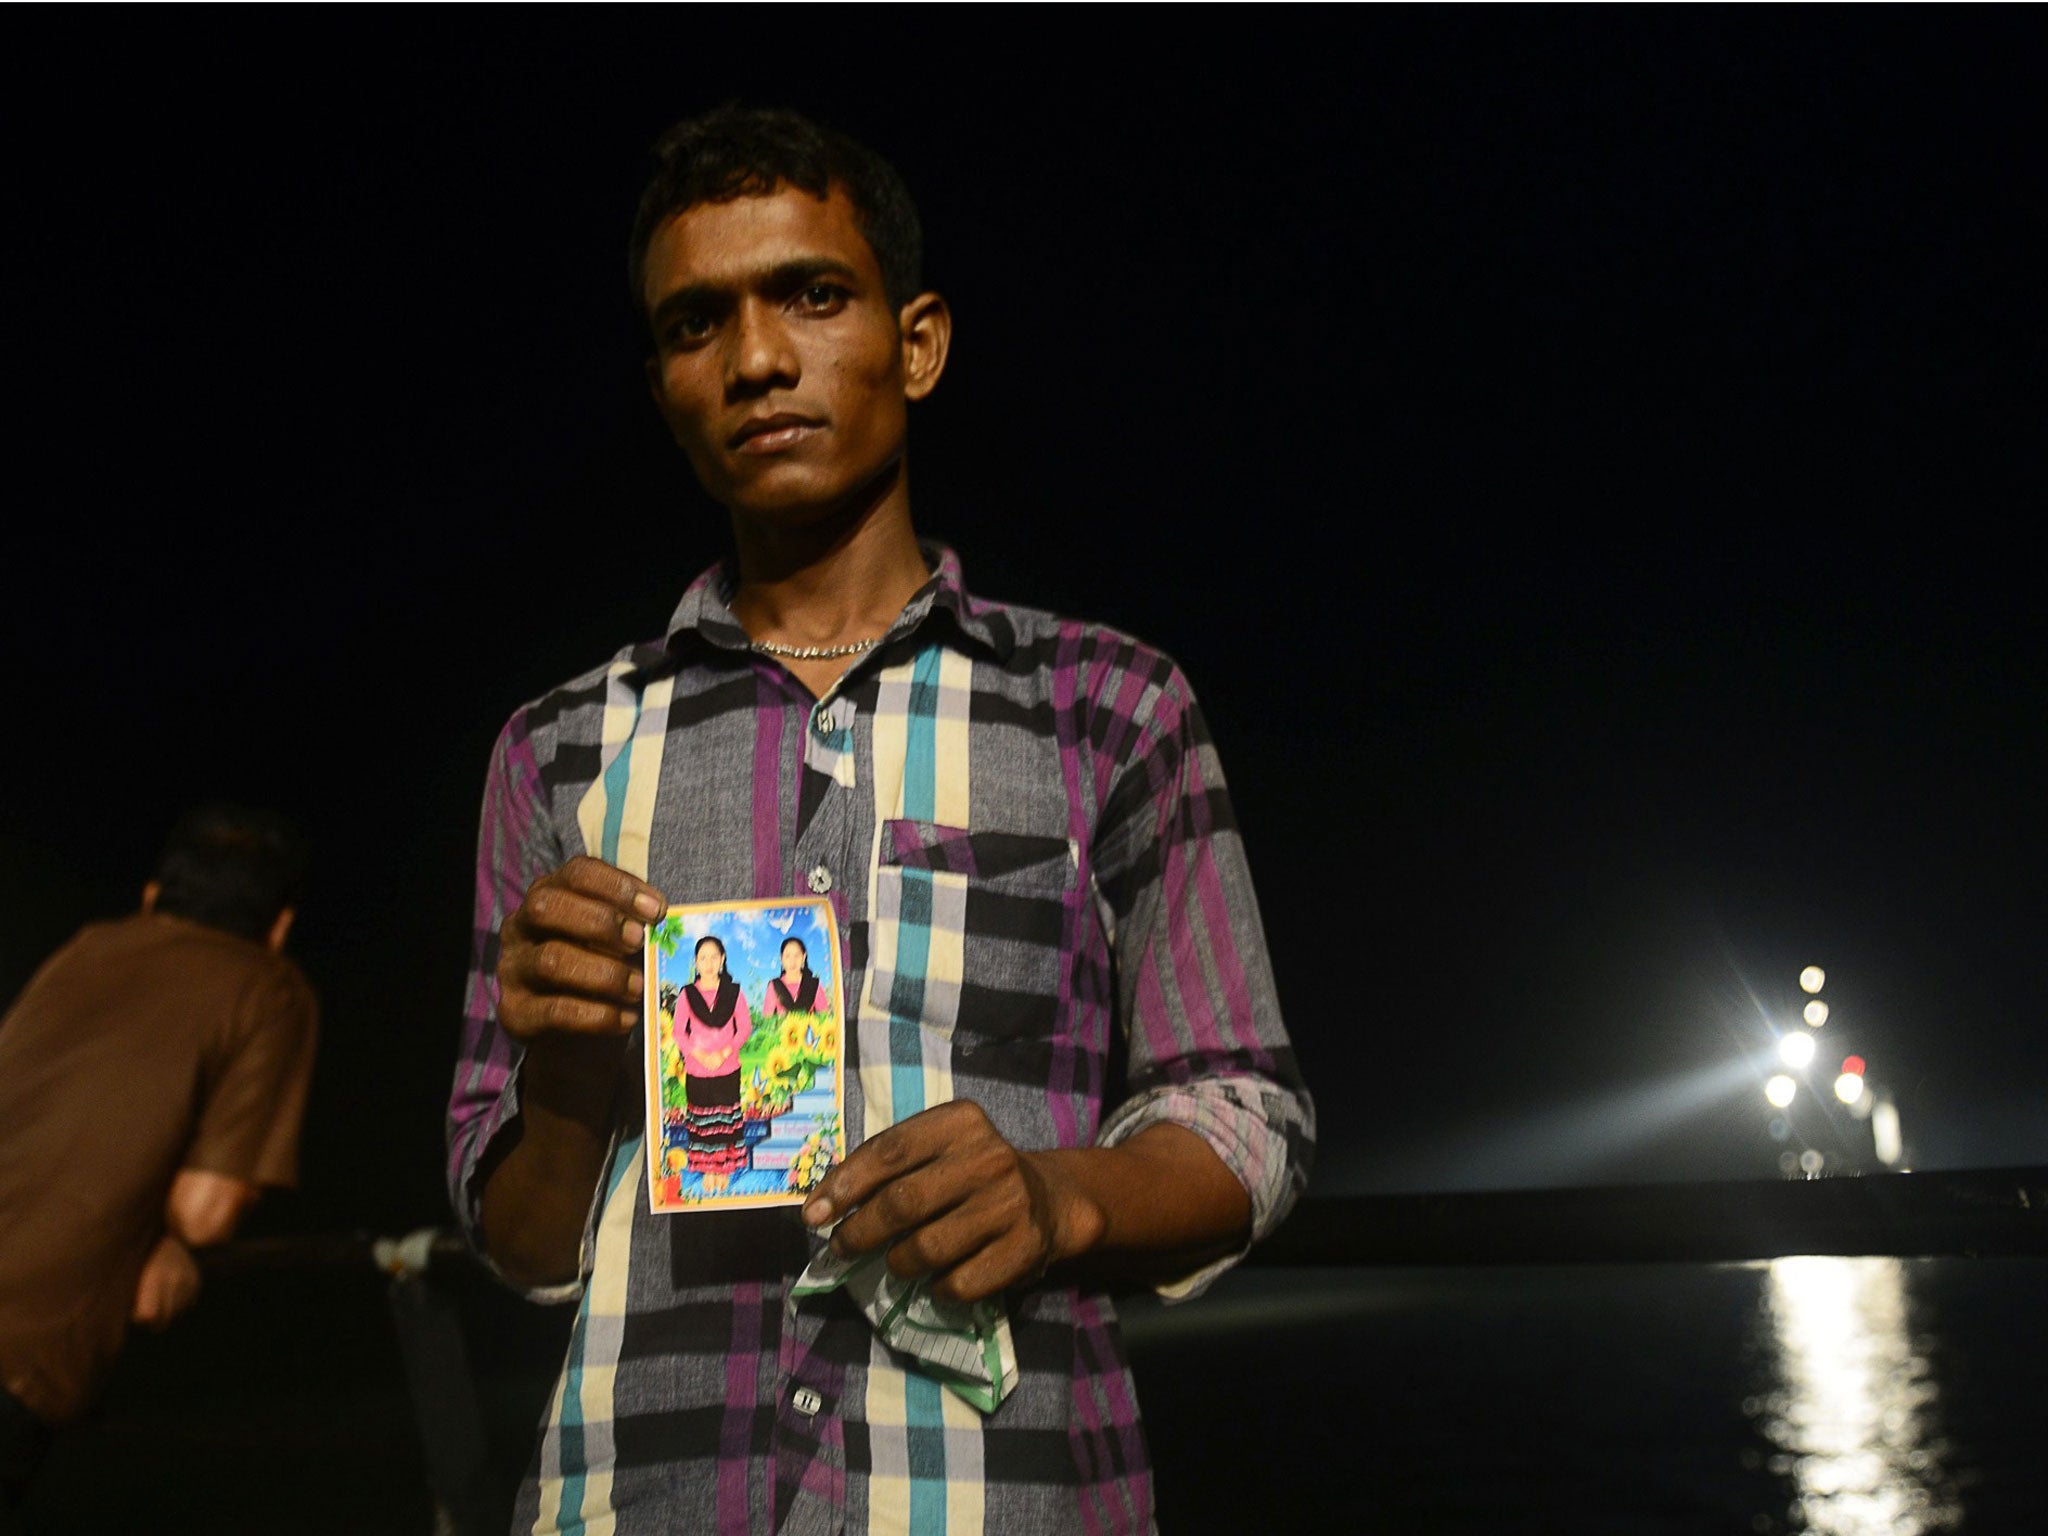 A Bangladeshi relative holds a photo of his missing niece during the night at the site where a ferry capsized and sank during bad weather on the Meghna river in the Munshiganj district